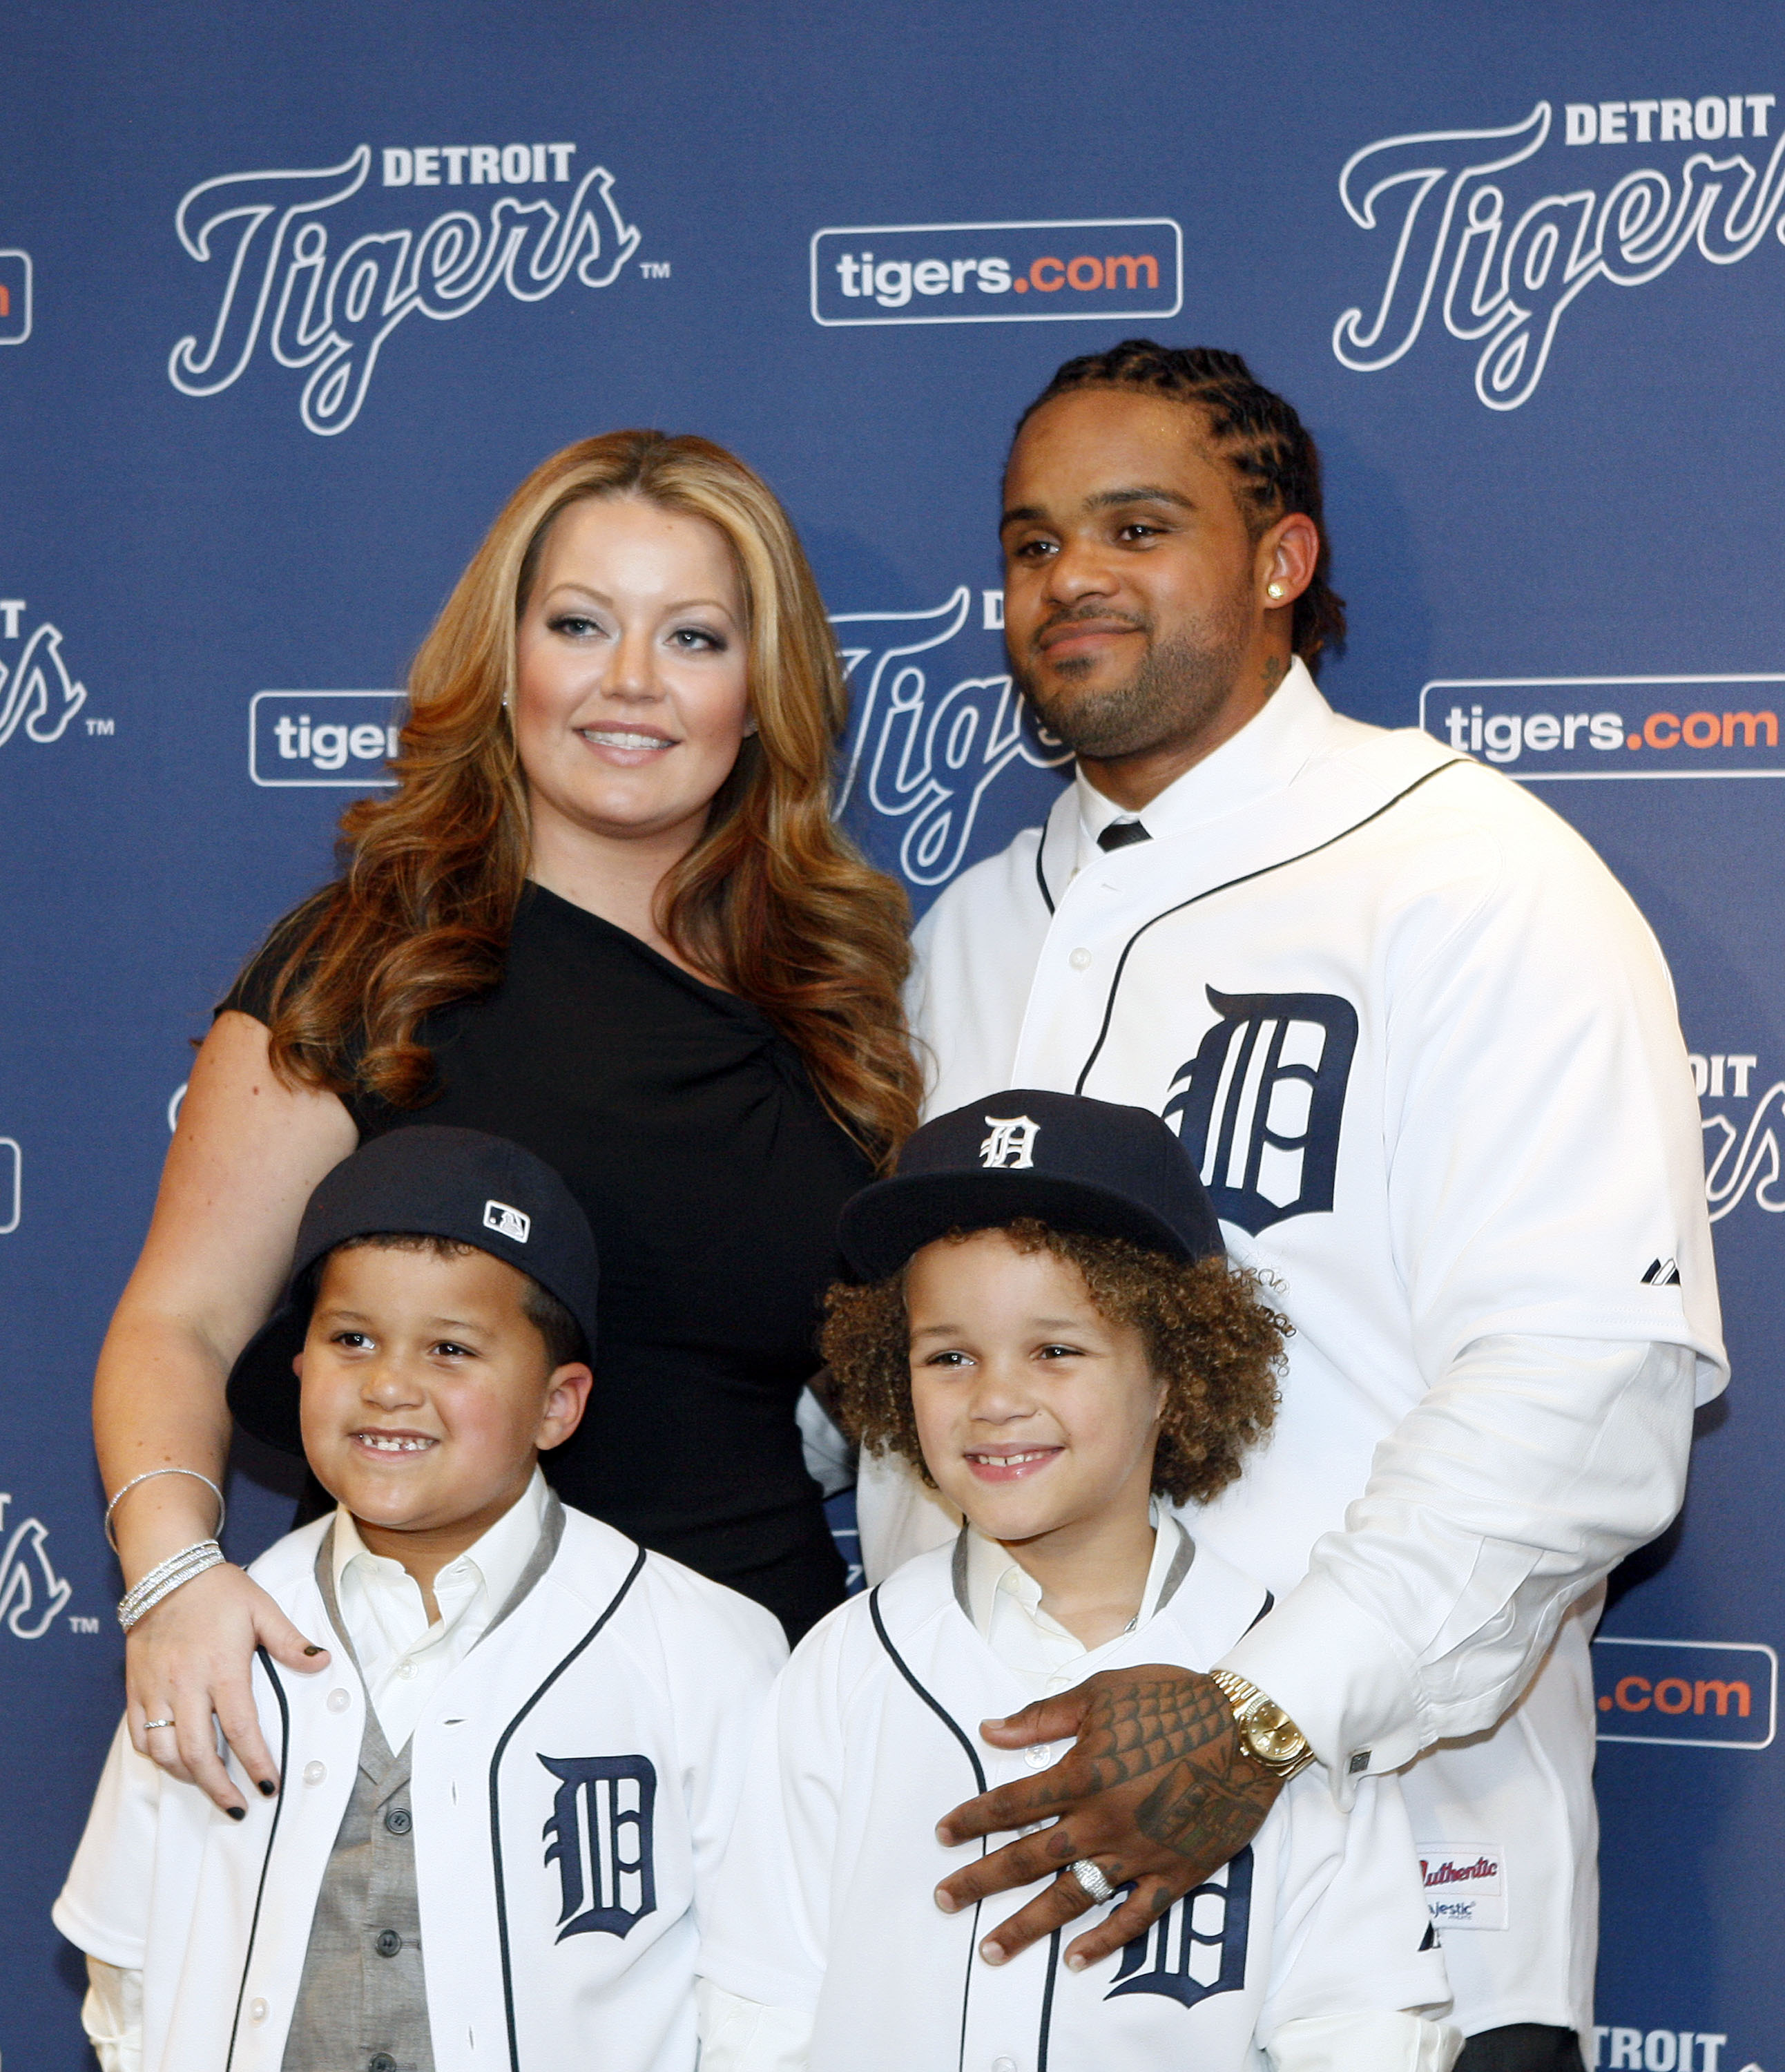 Tigers’ Prince Fielder Files For Divorce From Wife Of 8 Years – CBS Detroit